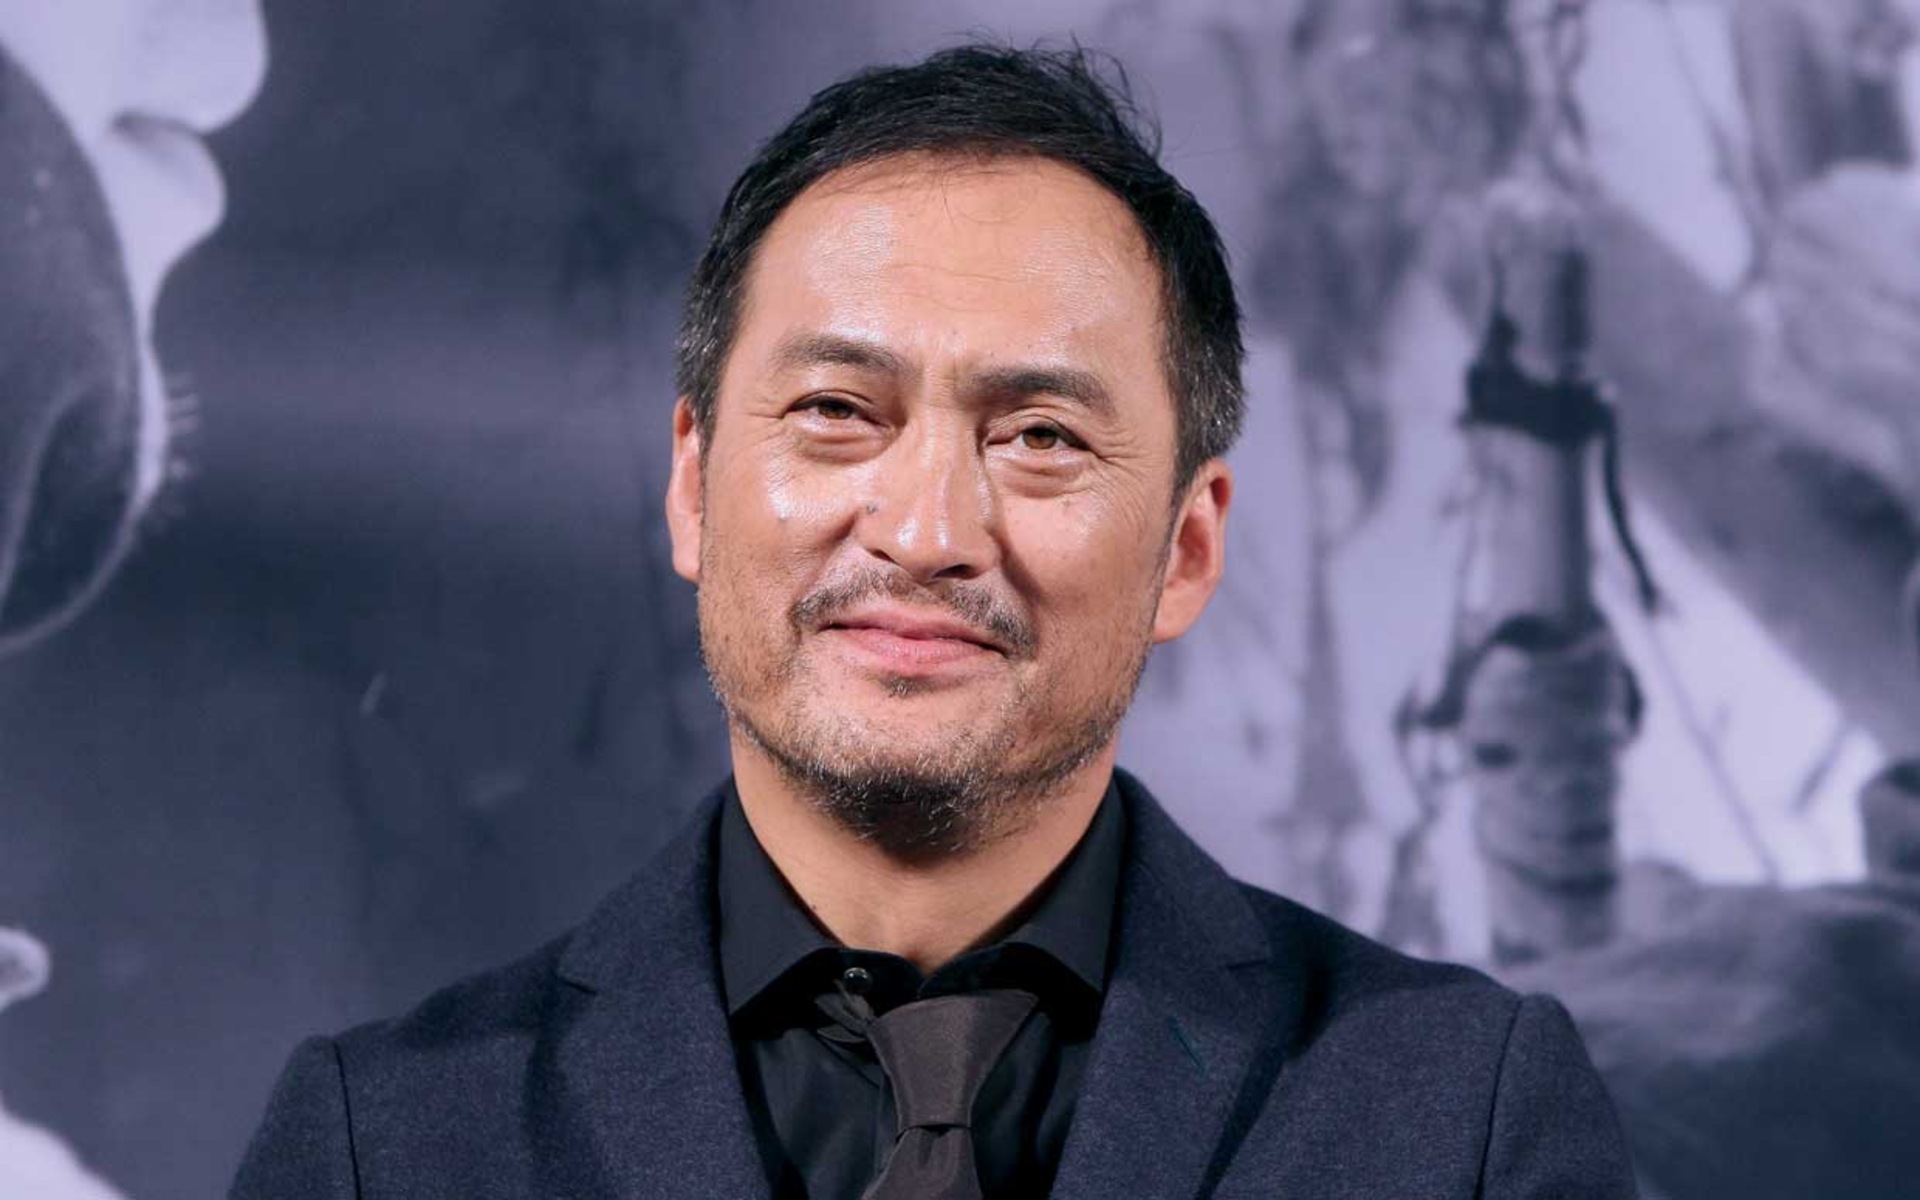 21 Mind-blowing Facts About Ken Watanabe - Facts.net